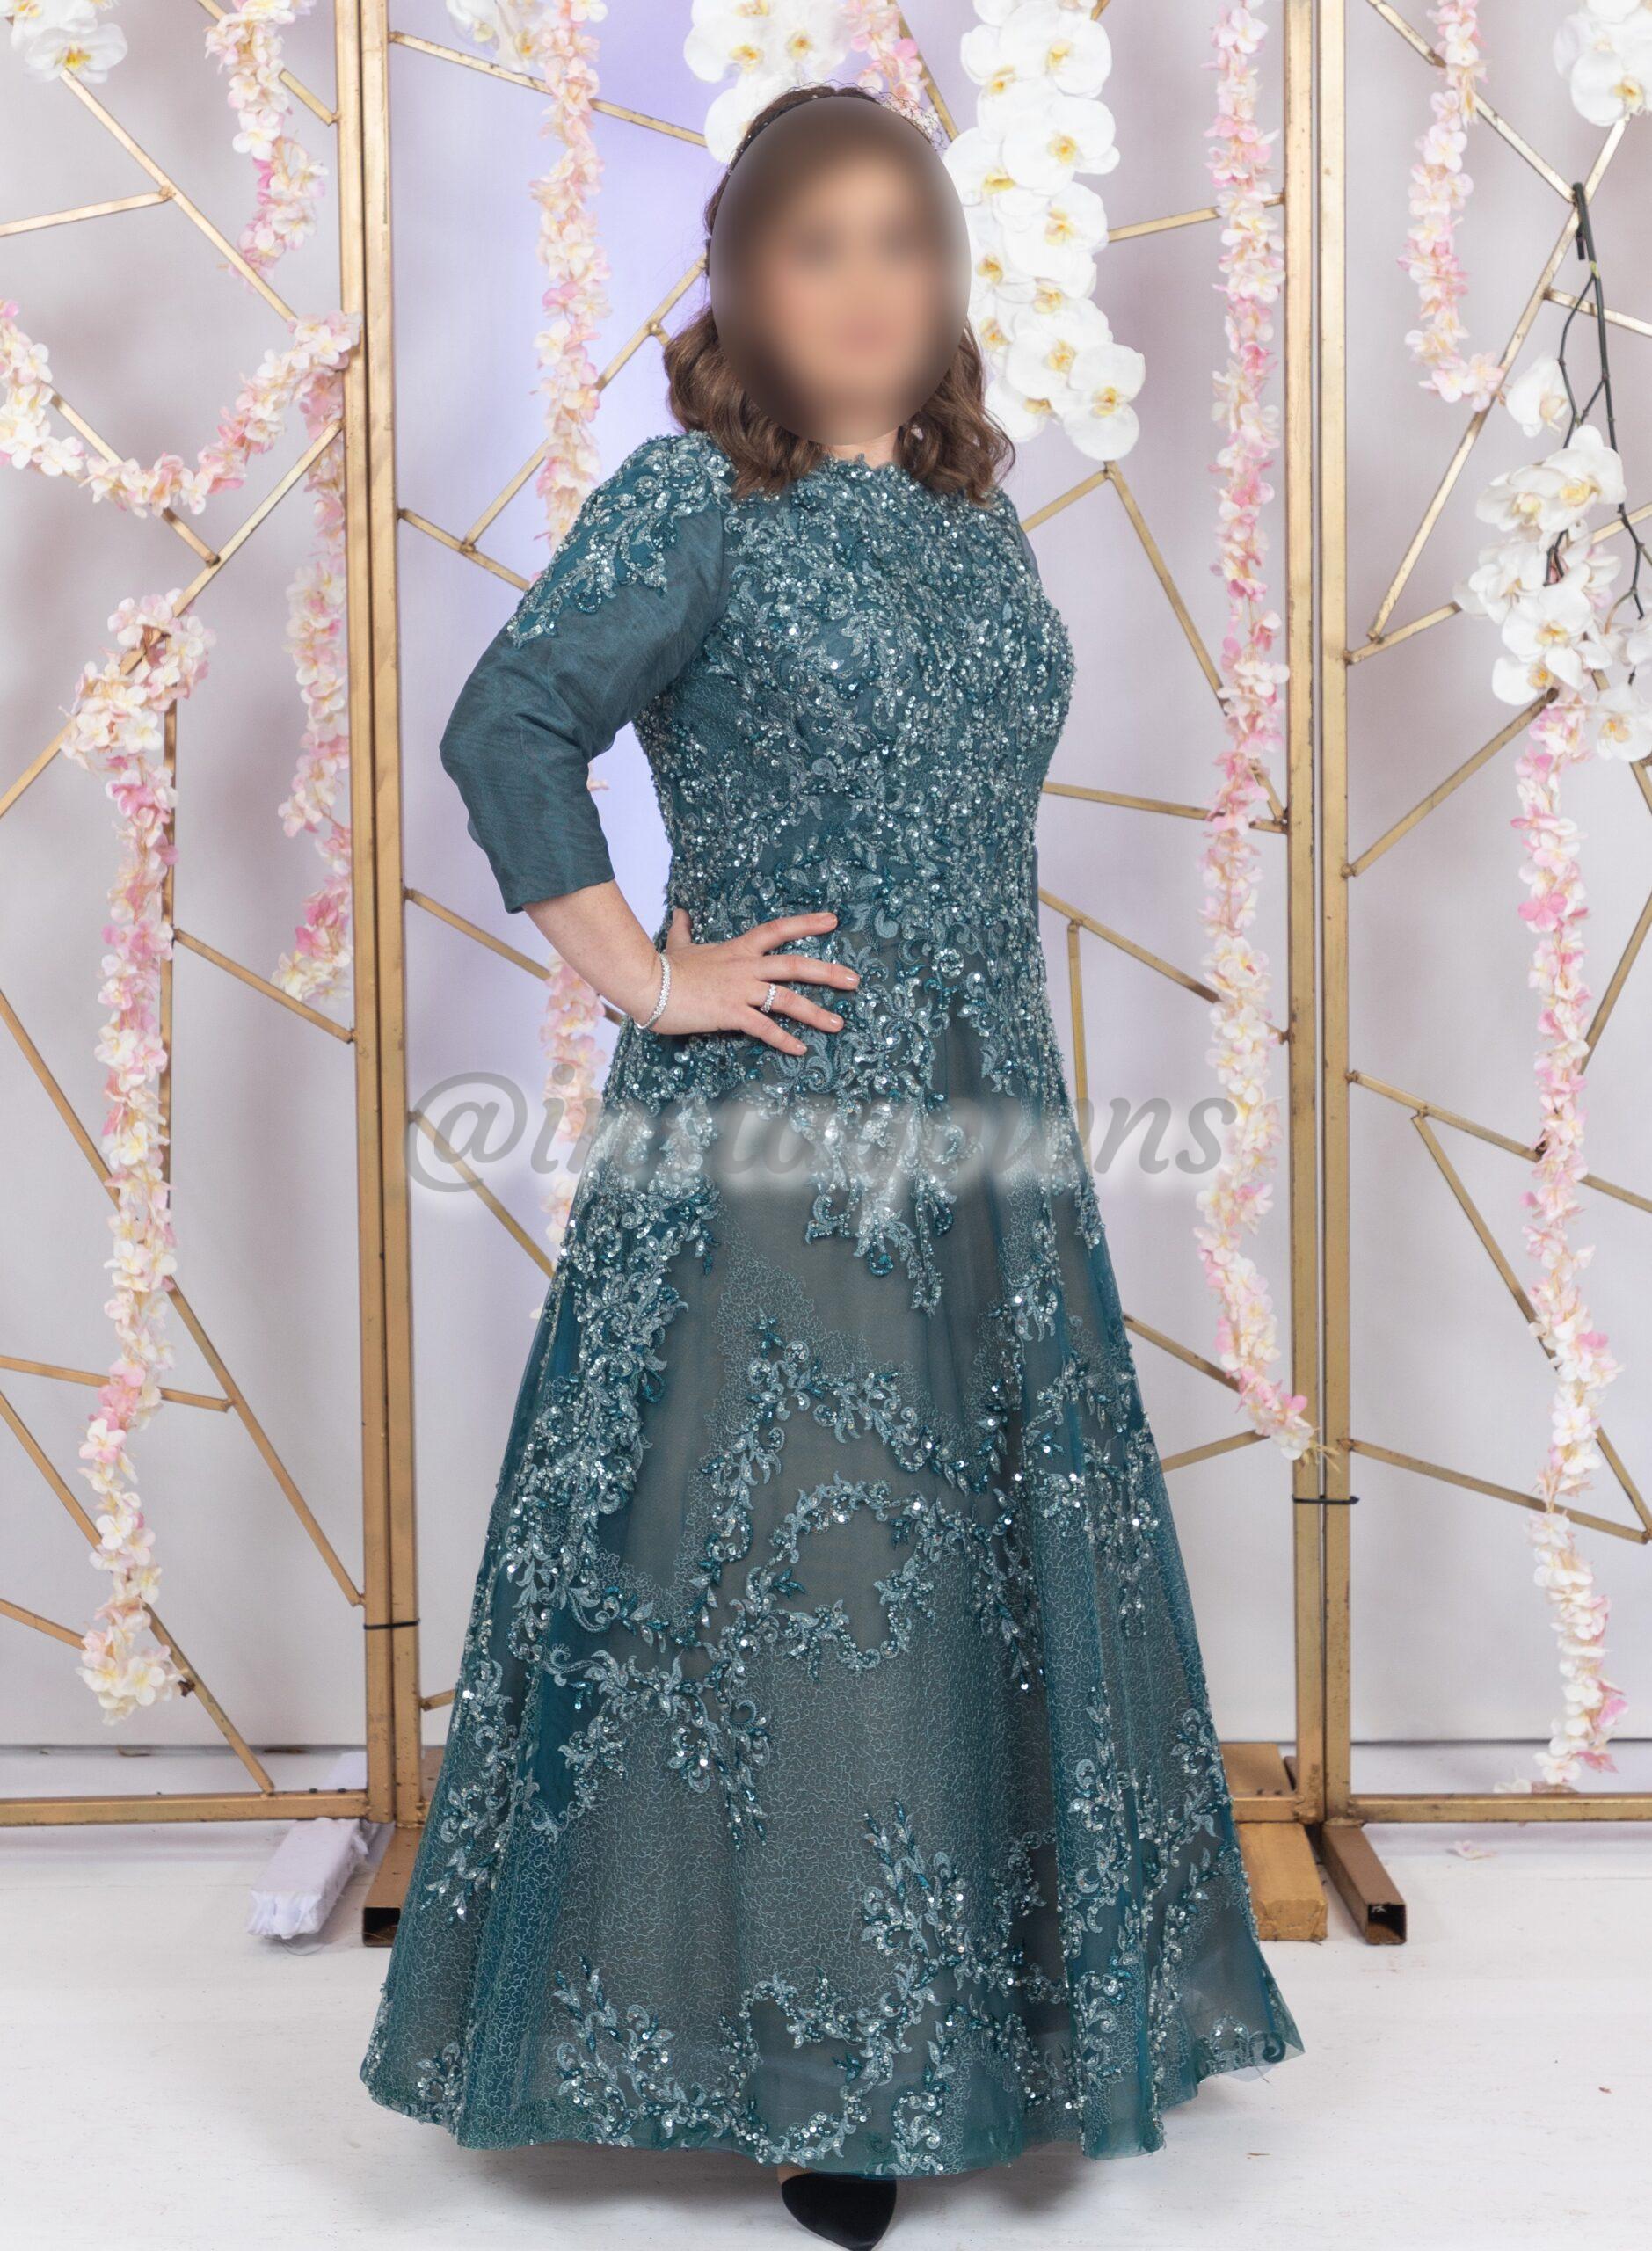 Beautiful customized emerald/blue lace Gown for sale – Instagowns